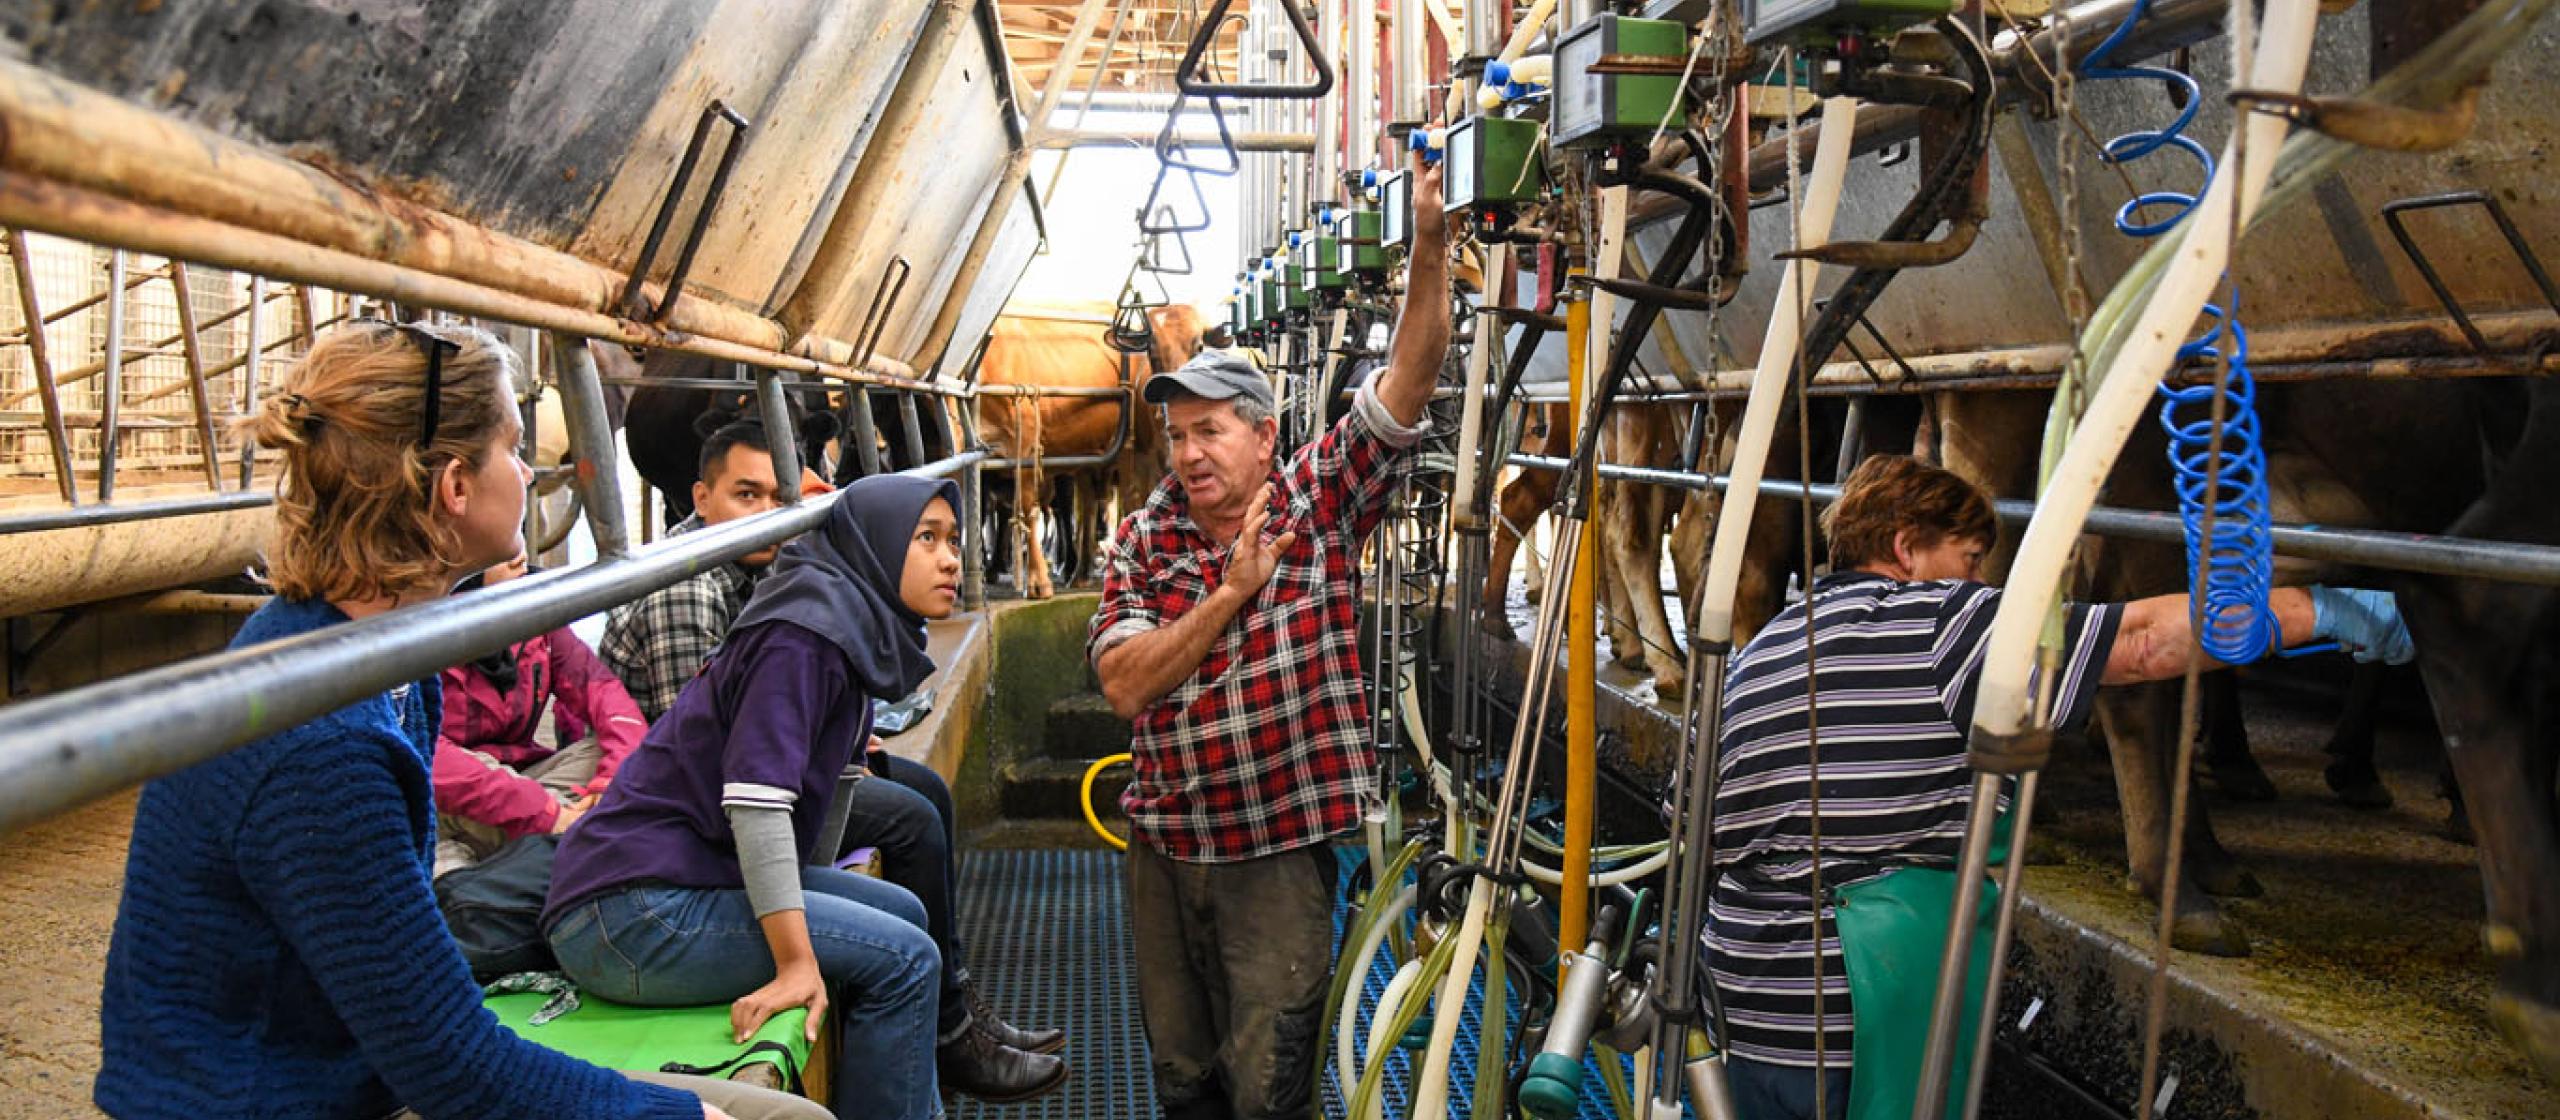 Indonesian researchers from the IndoDairy project visit an Australian dairy